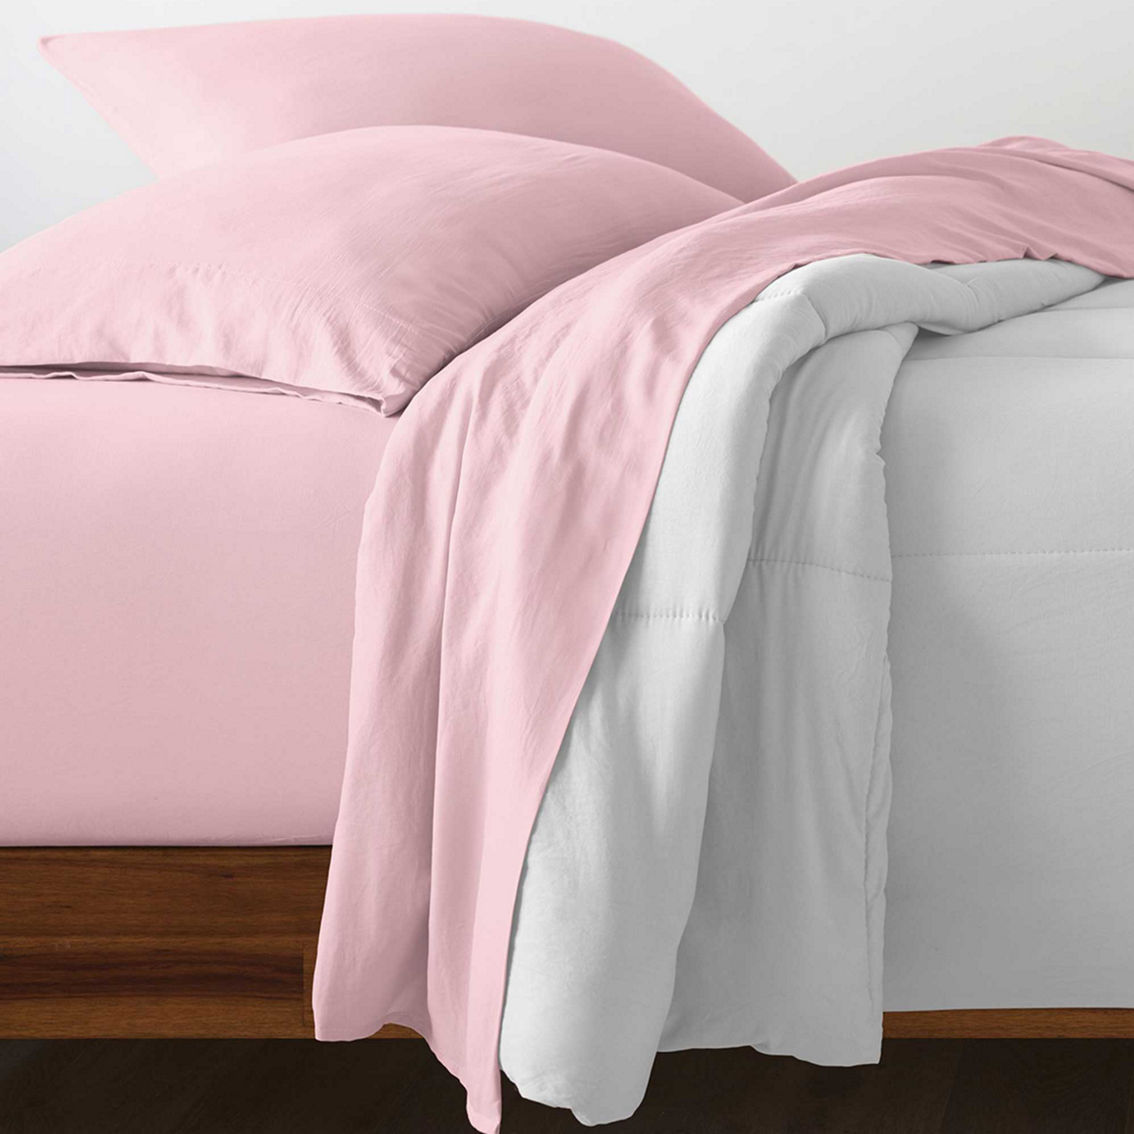 Ella Jayne Luxe Cotton Percale Crisp and Cool Set - Image 3 of 6